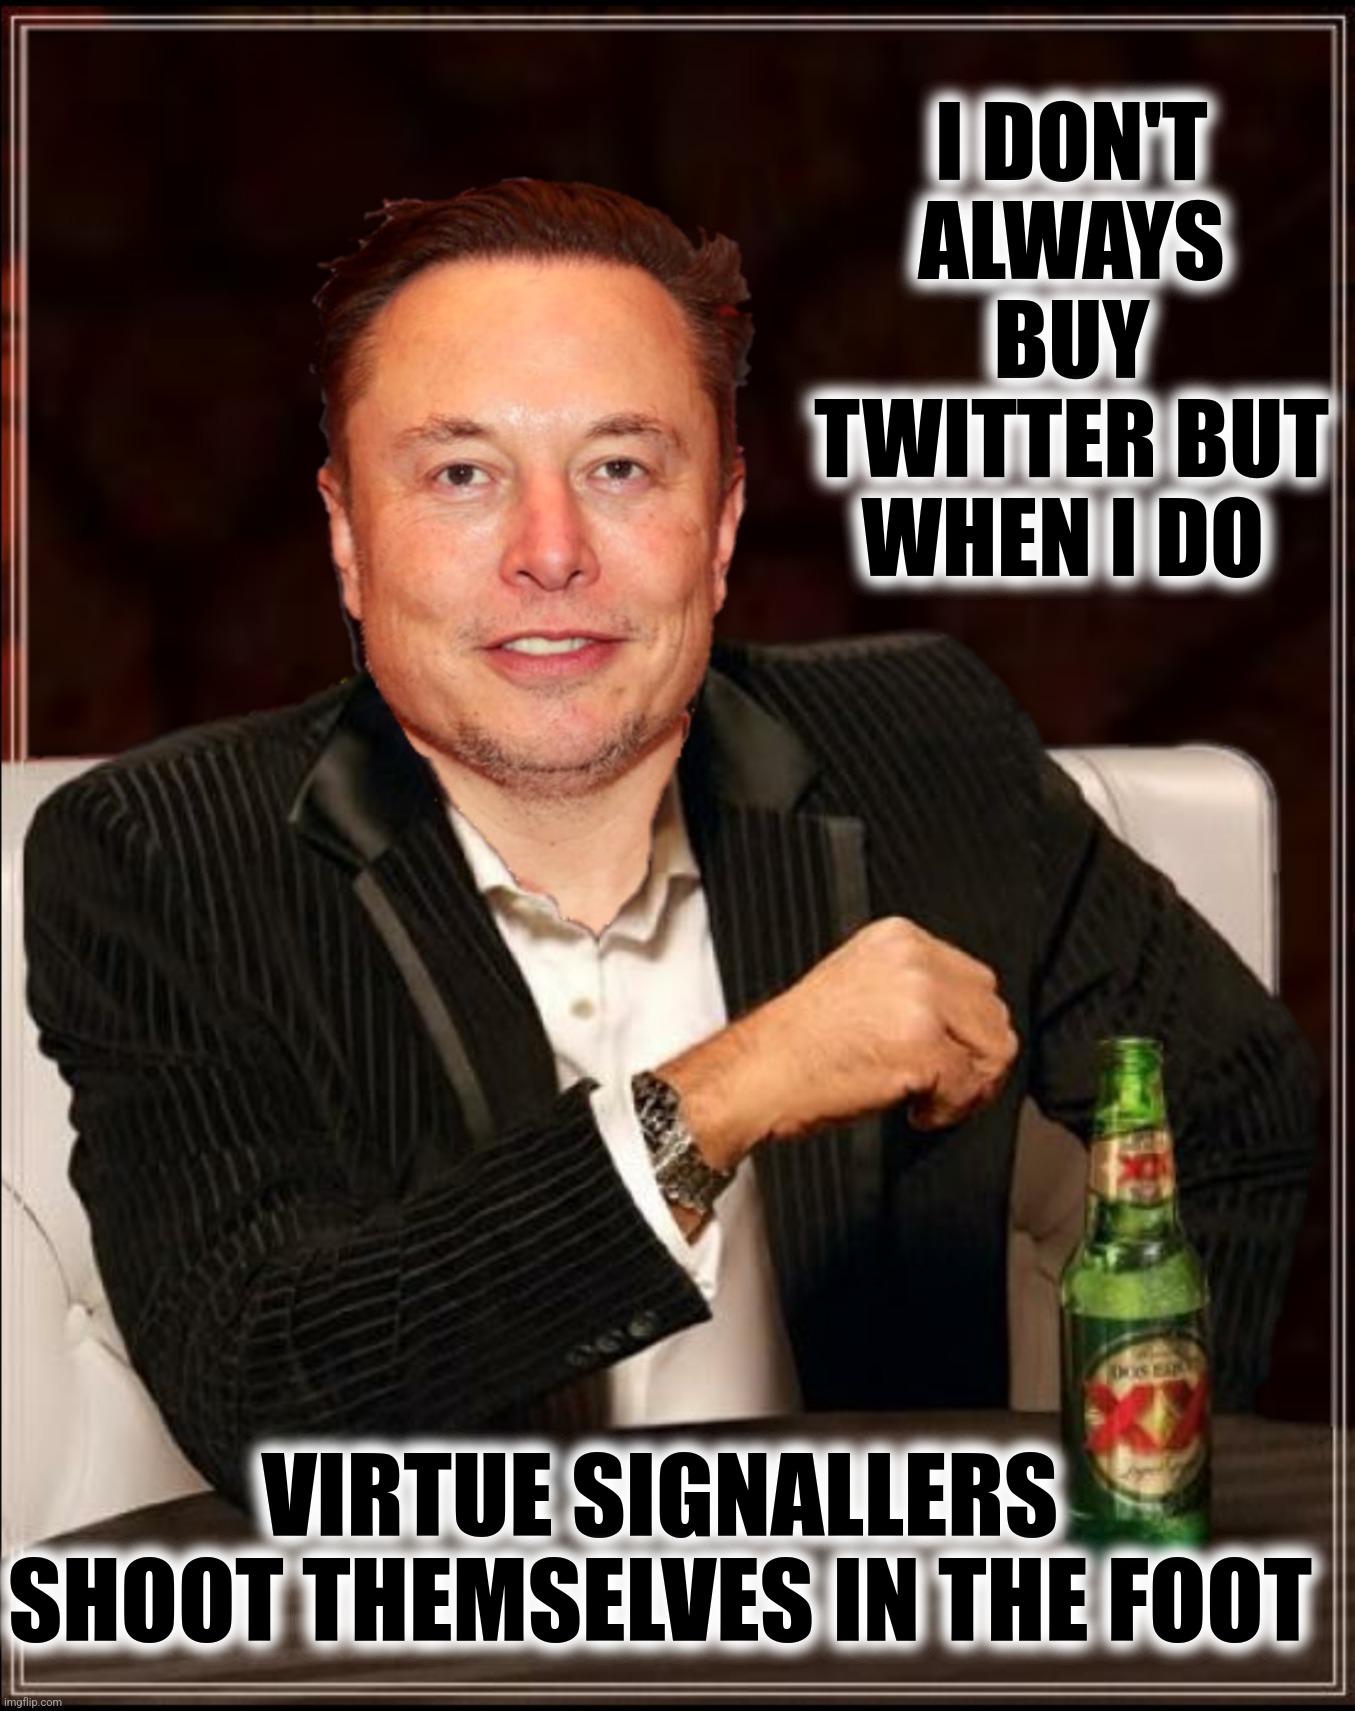 I DON'T ALWAYS BUY TWITTER BUT WHEN I DO VIRTUE SIGNALLERS SHOOT THEMSELVES IN THE FOOT | made w/ Imgflip meme maker